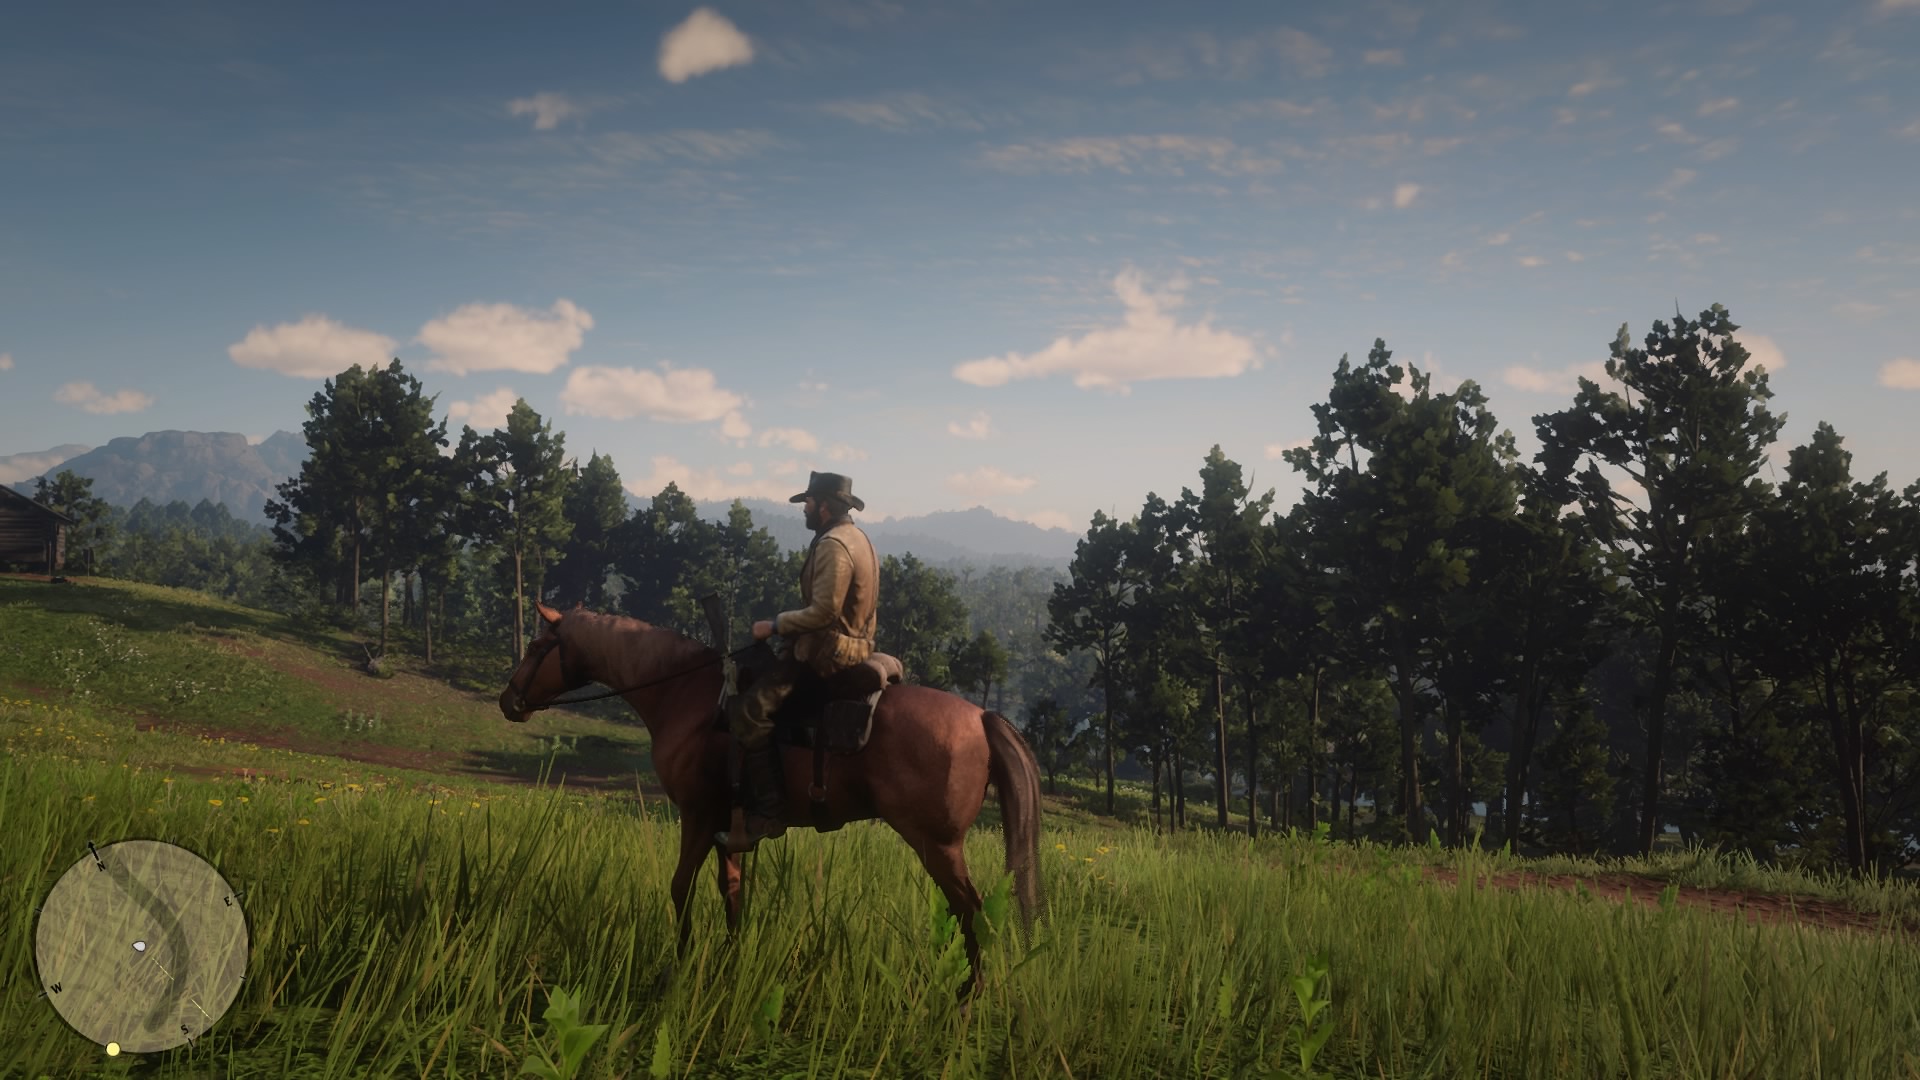 Xbox Major Leak Reveals that Red Dead Redemption 2 May Finally